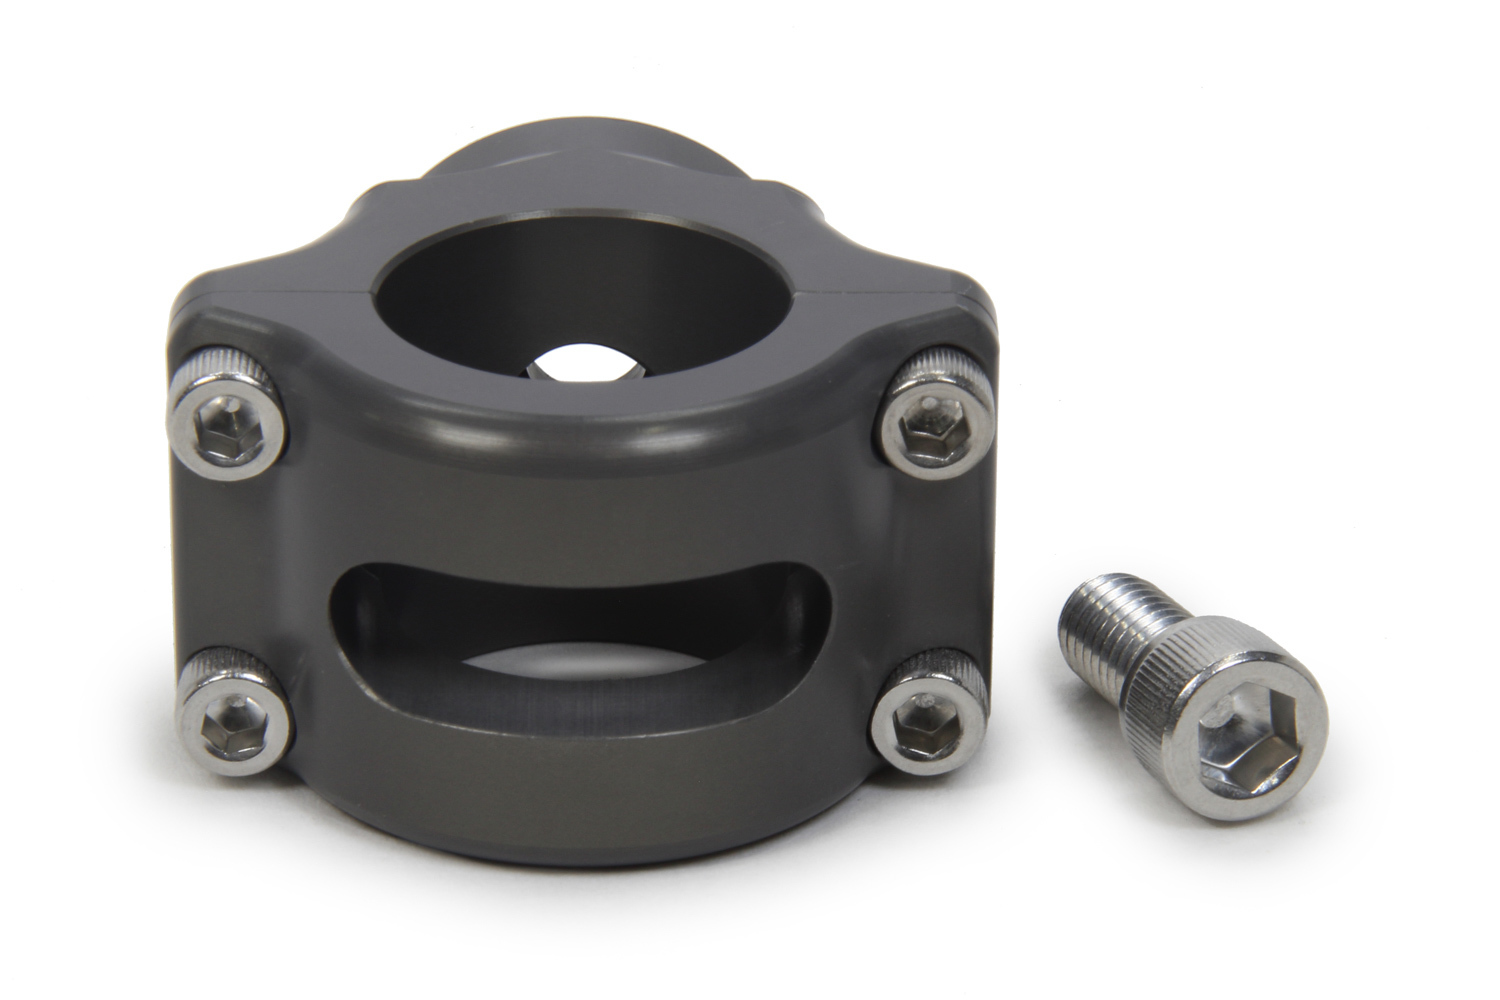 Peterson Fluid 09-1590 Oil Filter Mount, Clamp-On, Aluminum, Gray Anodized, Peterson Engine Priming Filter, 1-1/4 in OD Tube, Each